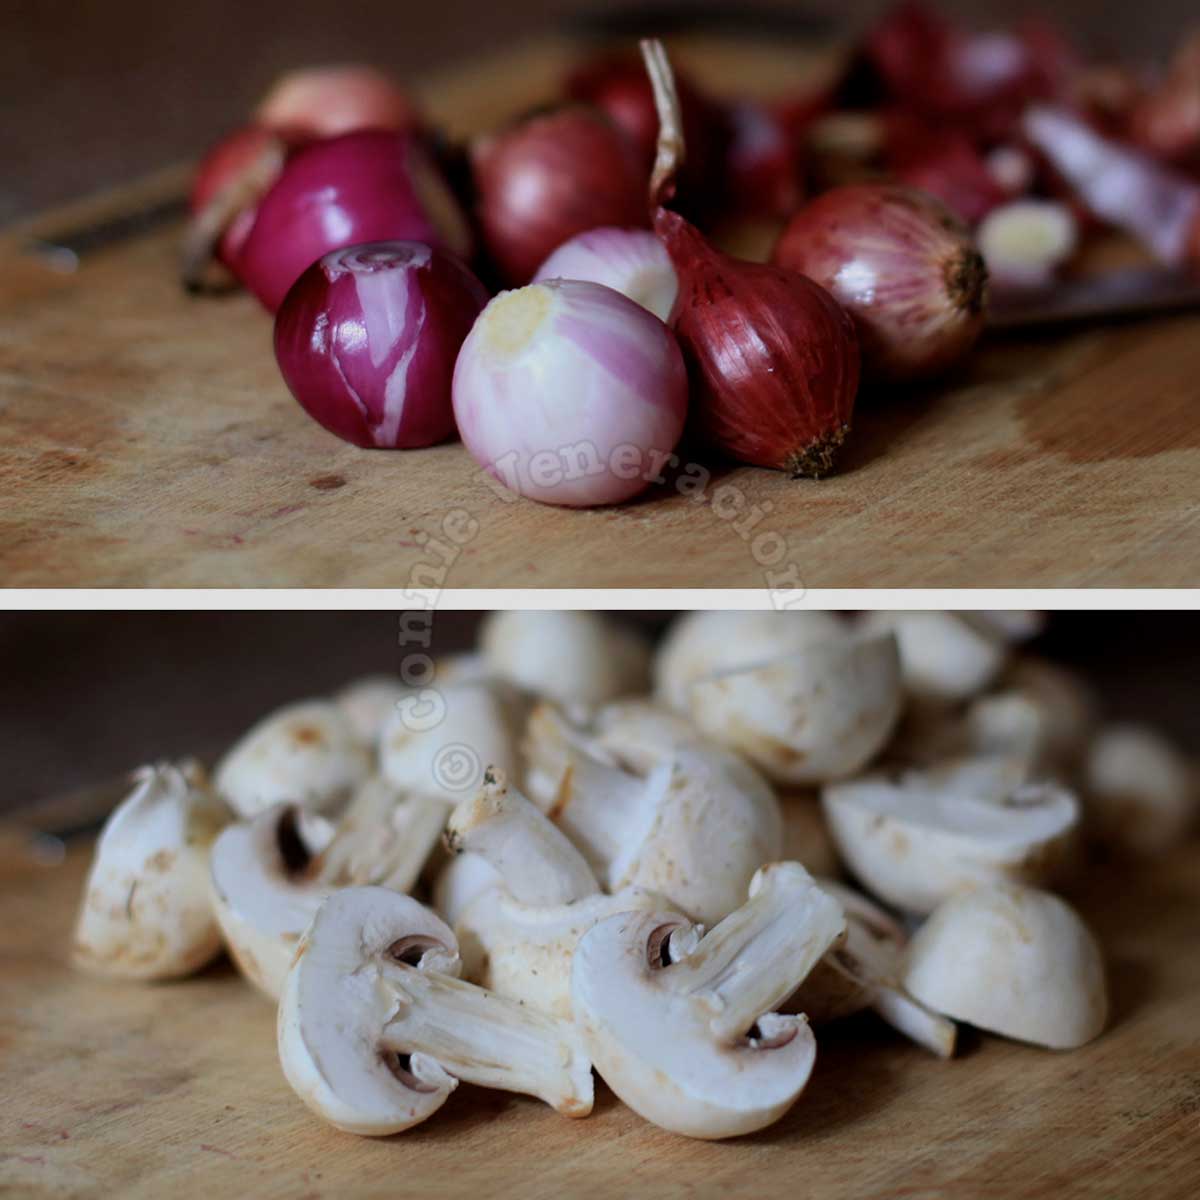 Pearl onions and button mushrooms on bamboo chopping board